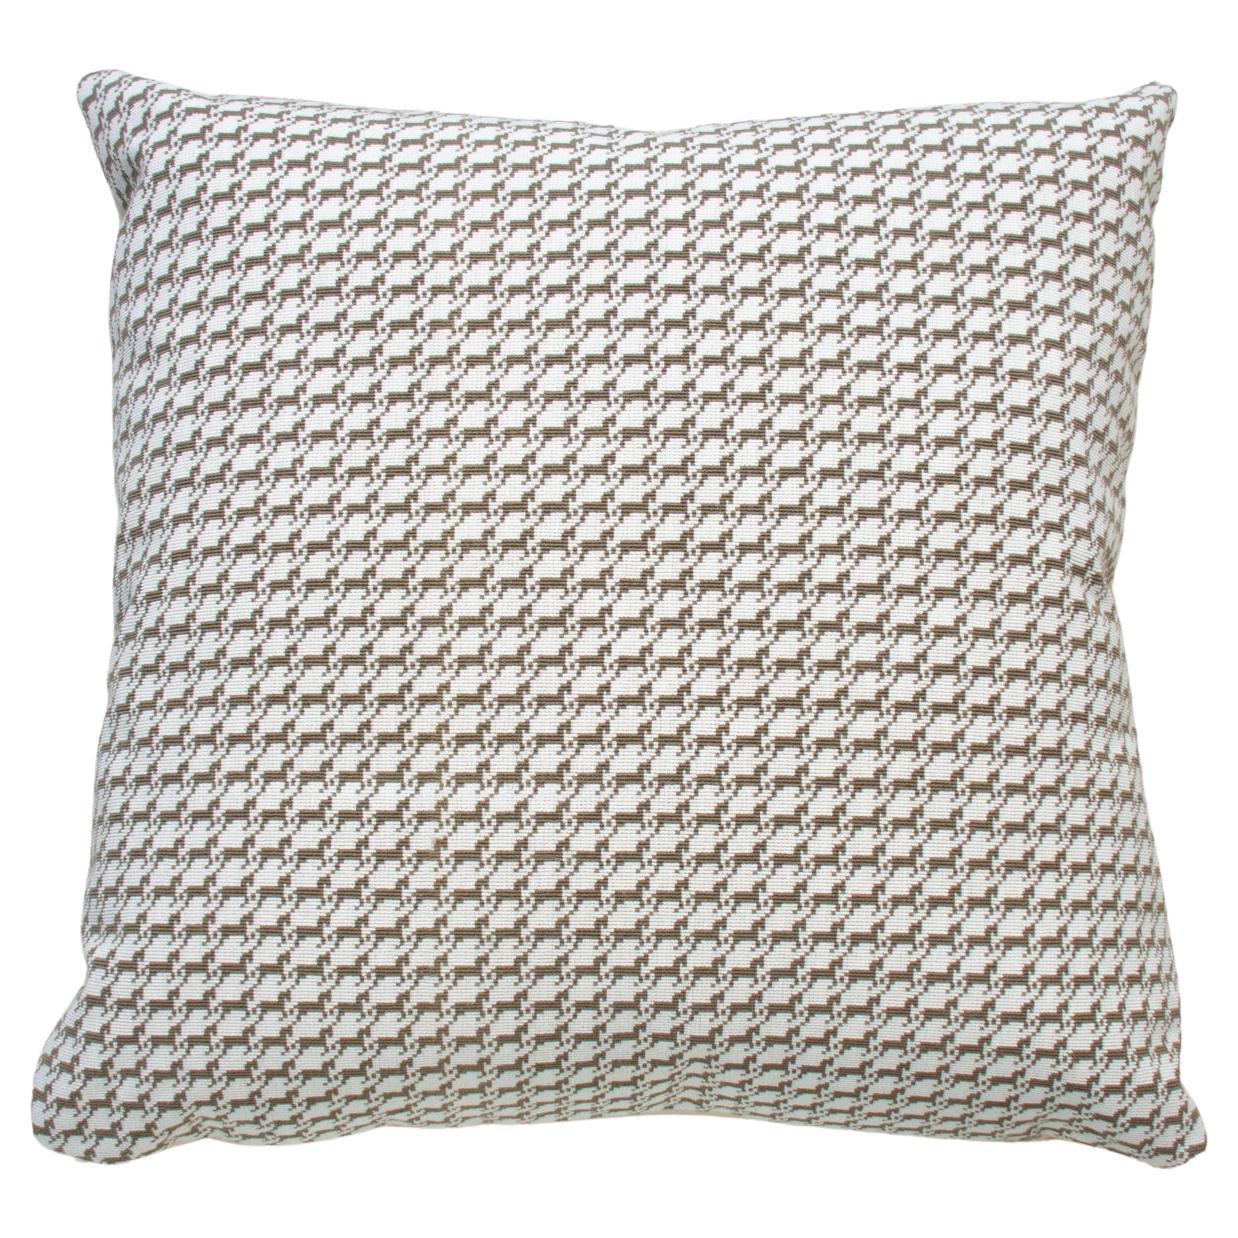 Hermes Pillow Cheval Pixel, Ecru Backing For Sale